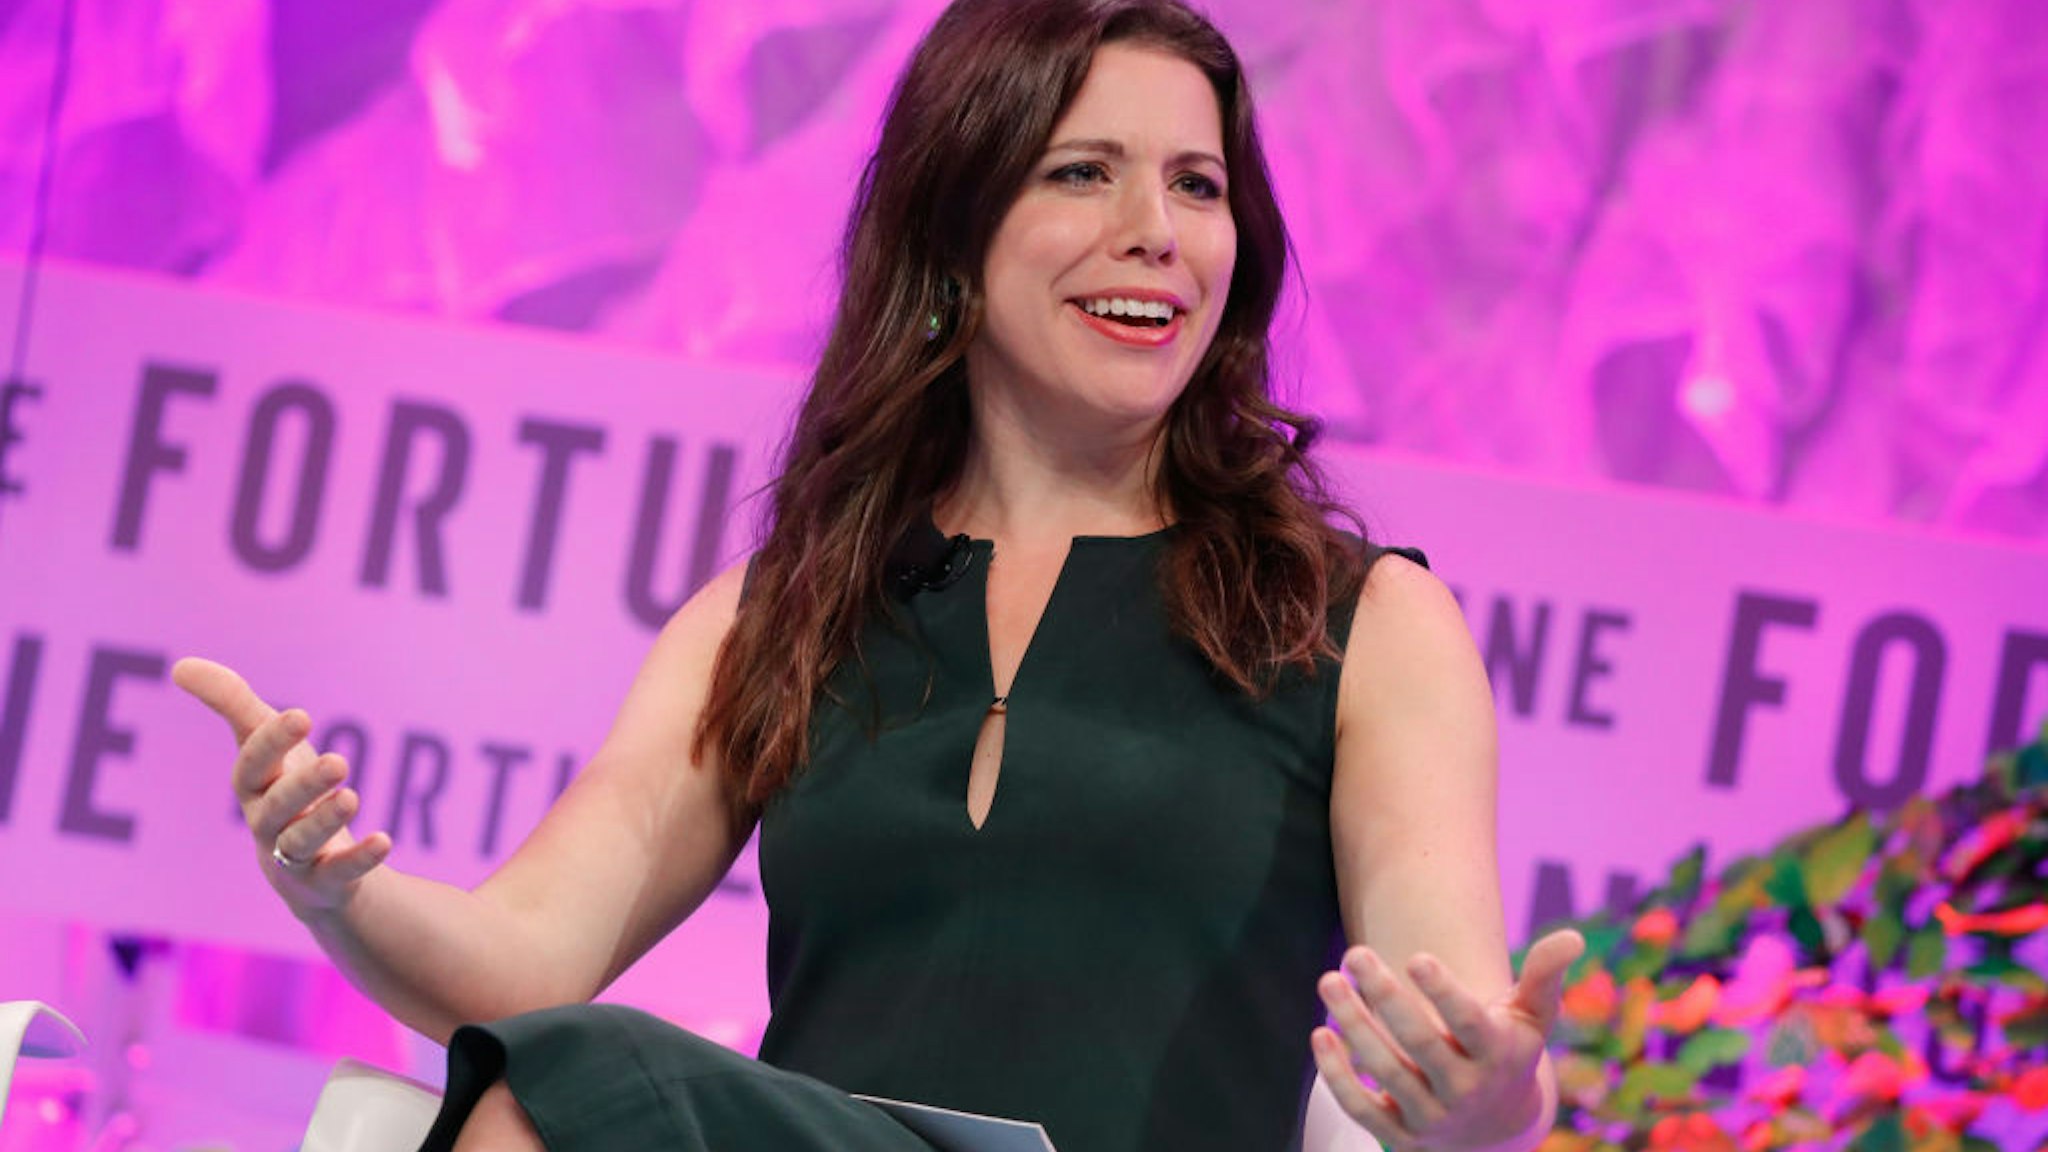 CNN Political Commentator Mary Katharine Ham speaks onstage at the Fortune Most Powerful Women Summit - Day 3 on October 11, 2017 in Washington, DC.